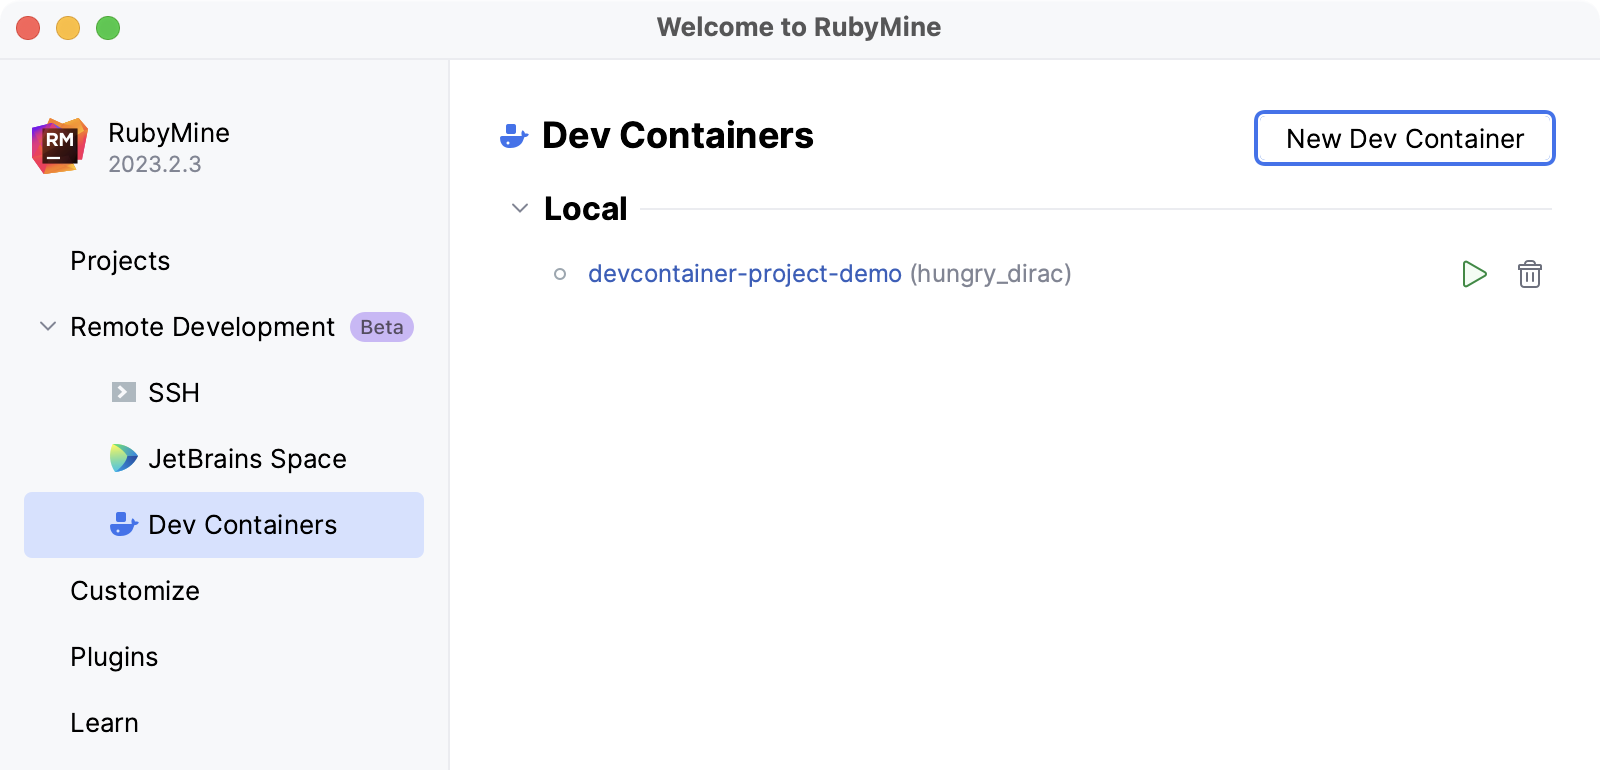 Recent Dev Containers